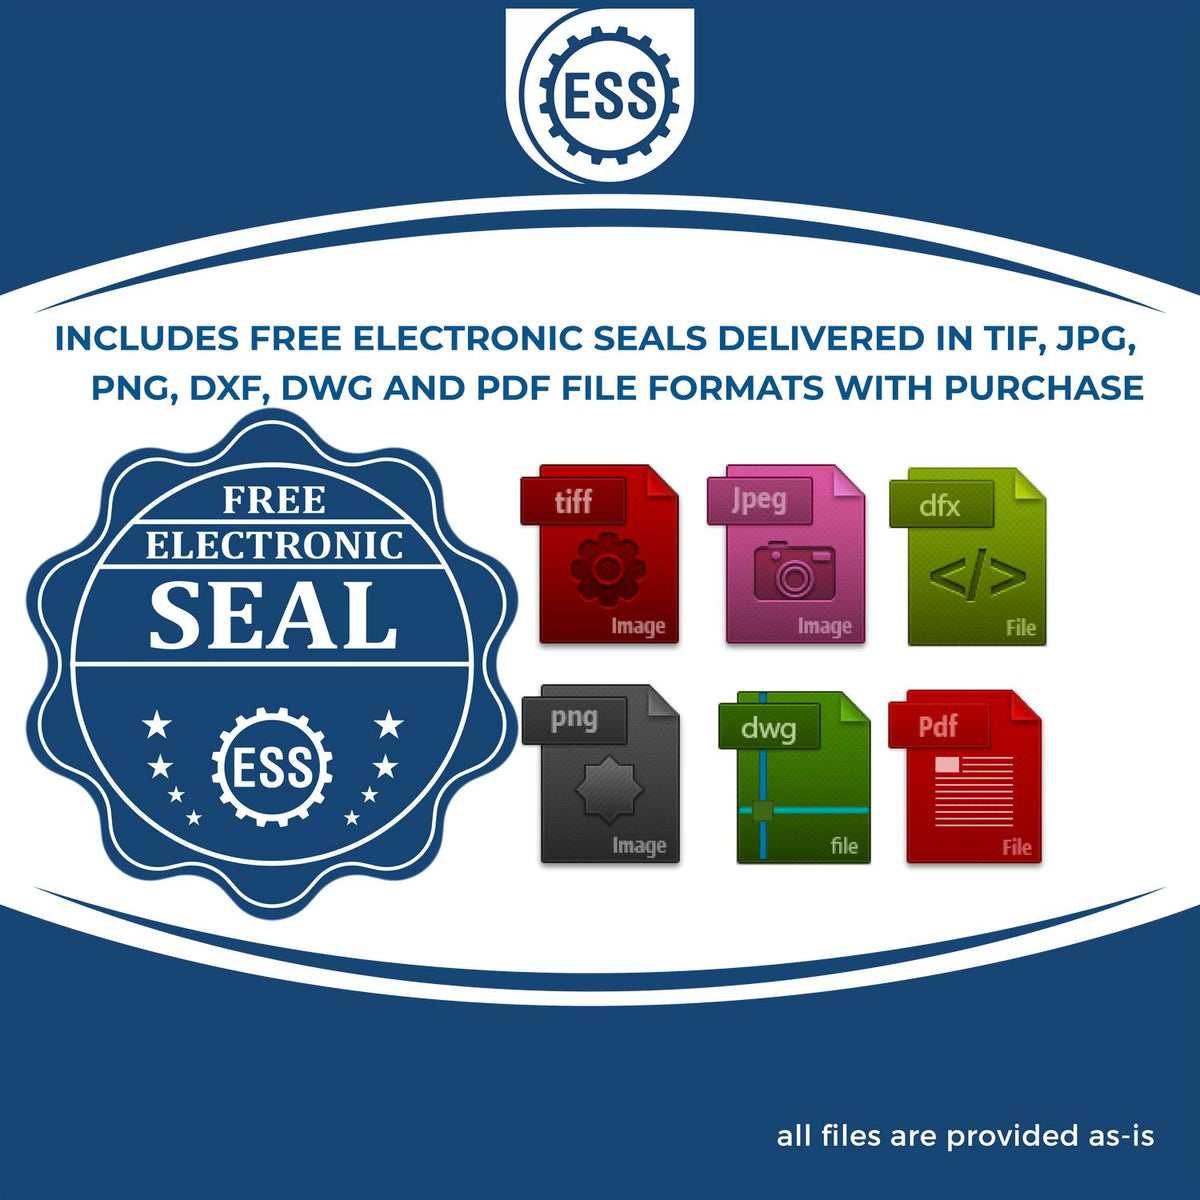 An infographic for the free electronic seal for the Slim Pre-Inked Hawaii Land Surveyor Seal Stamp illustrating the different file type icons such as DXF, DWG, TIF, JPG and PNG.